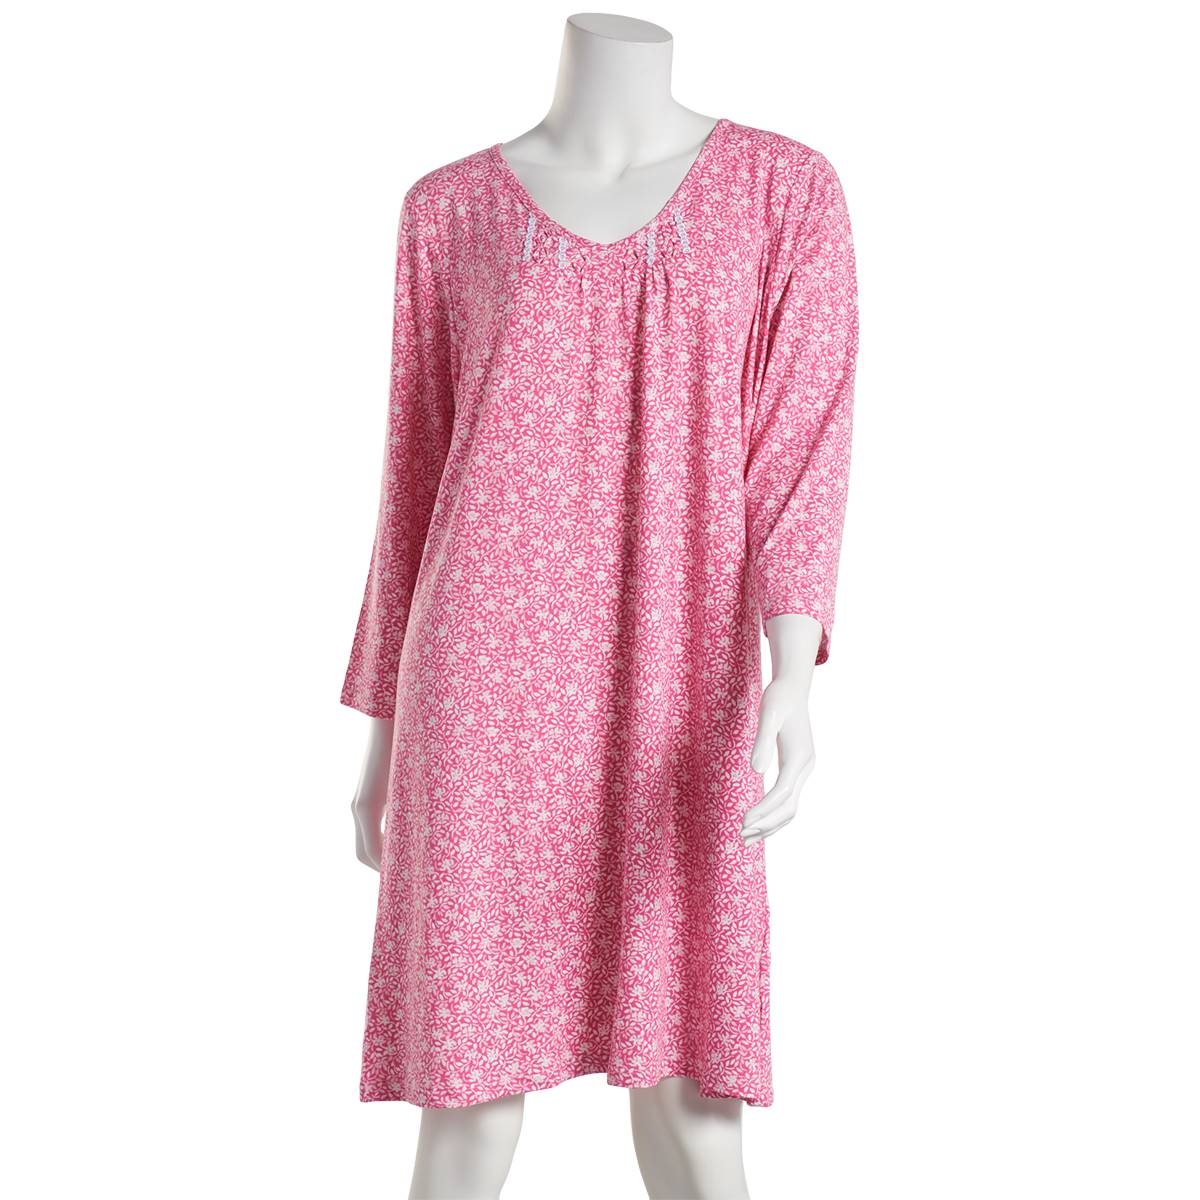 Womens Carole Hochman 3/4 Sleeve Etched Floral V-Neck Nightgown